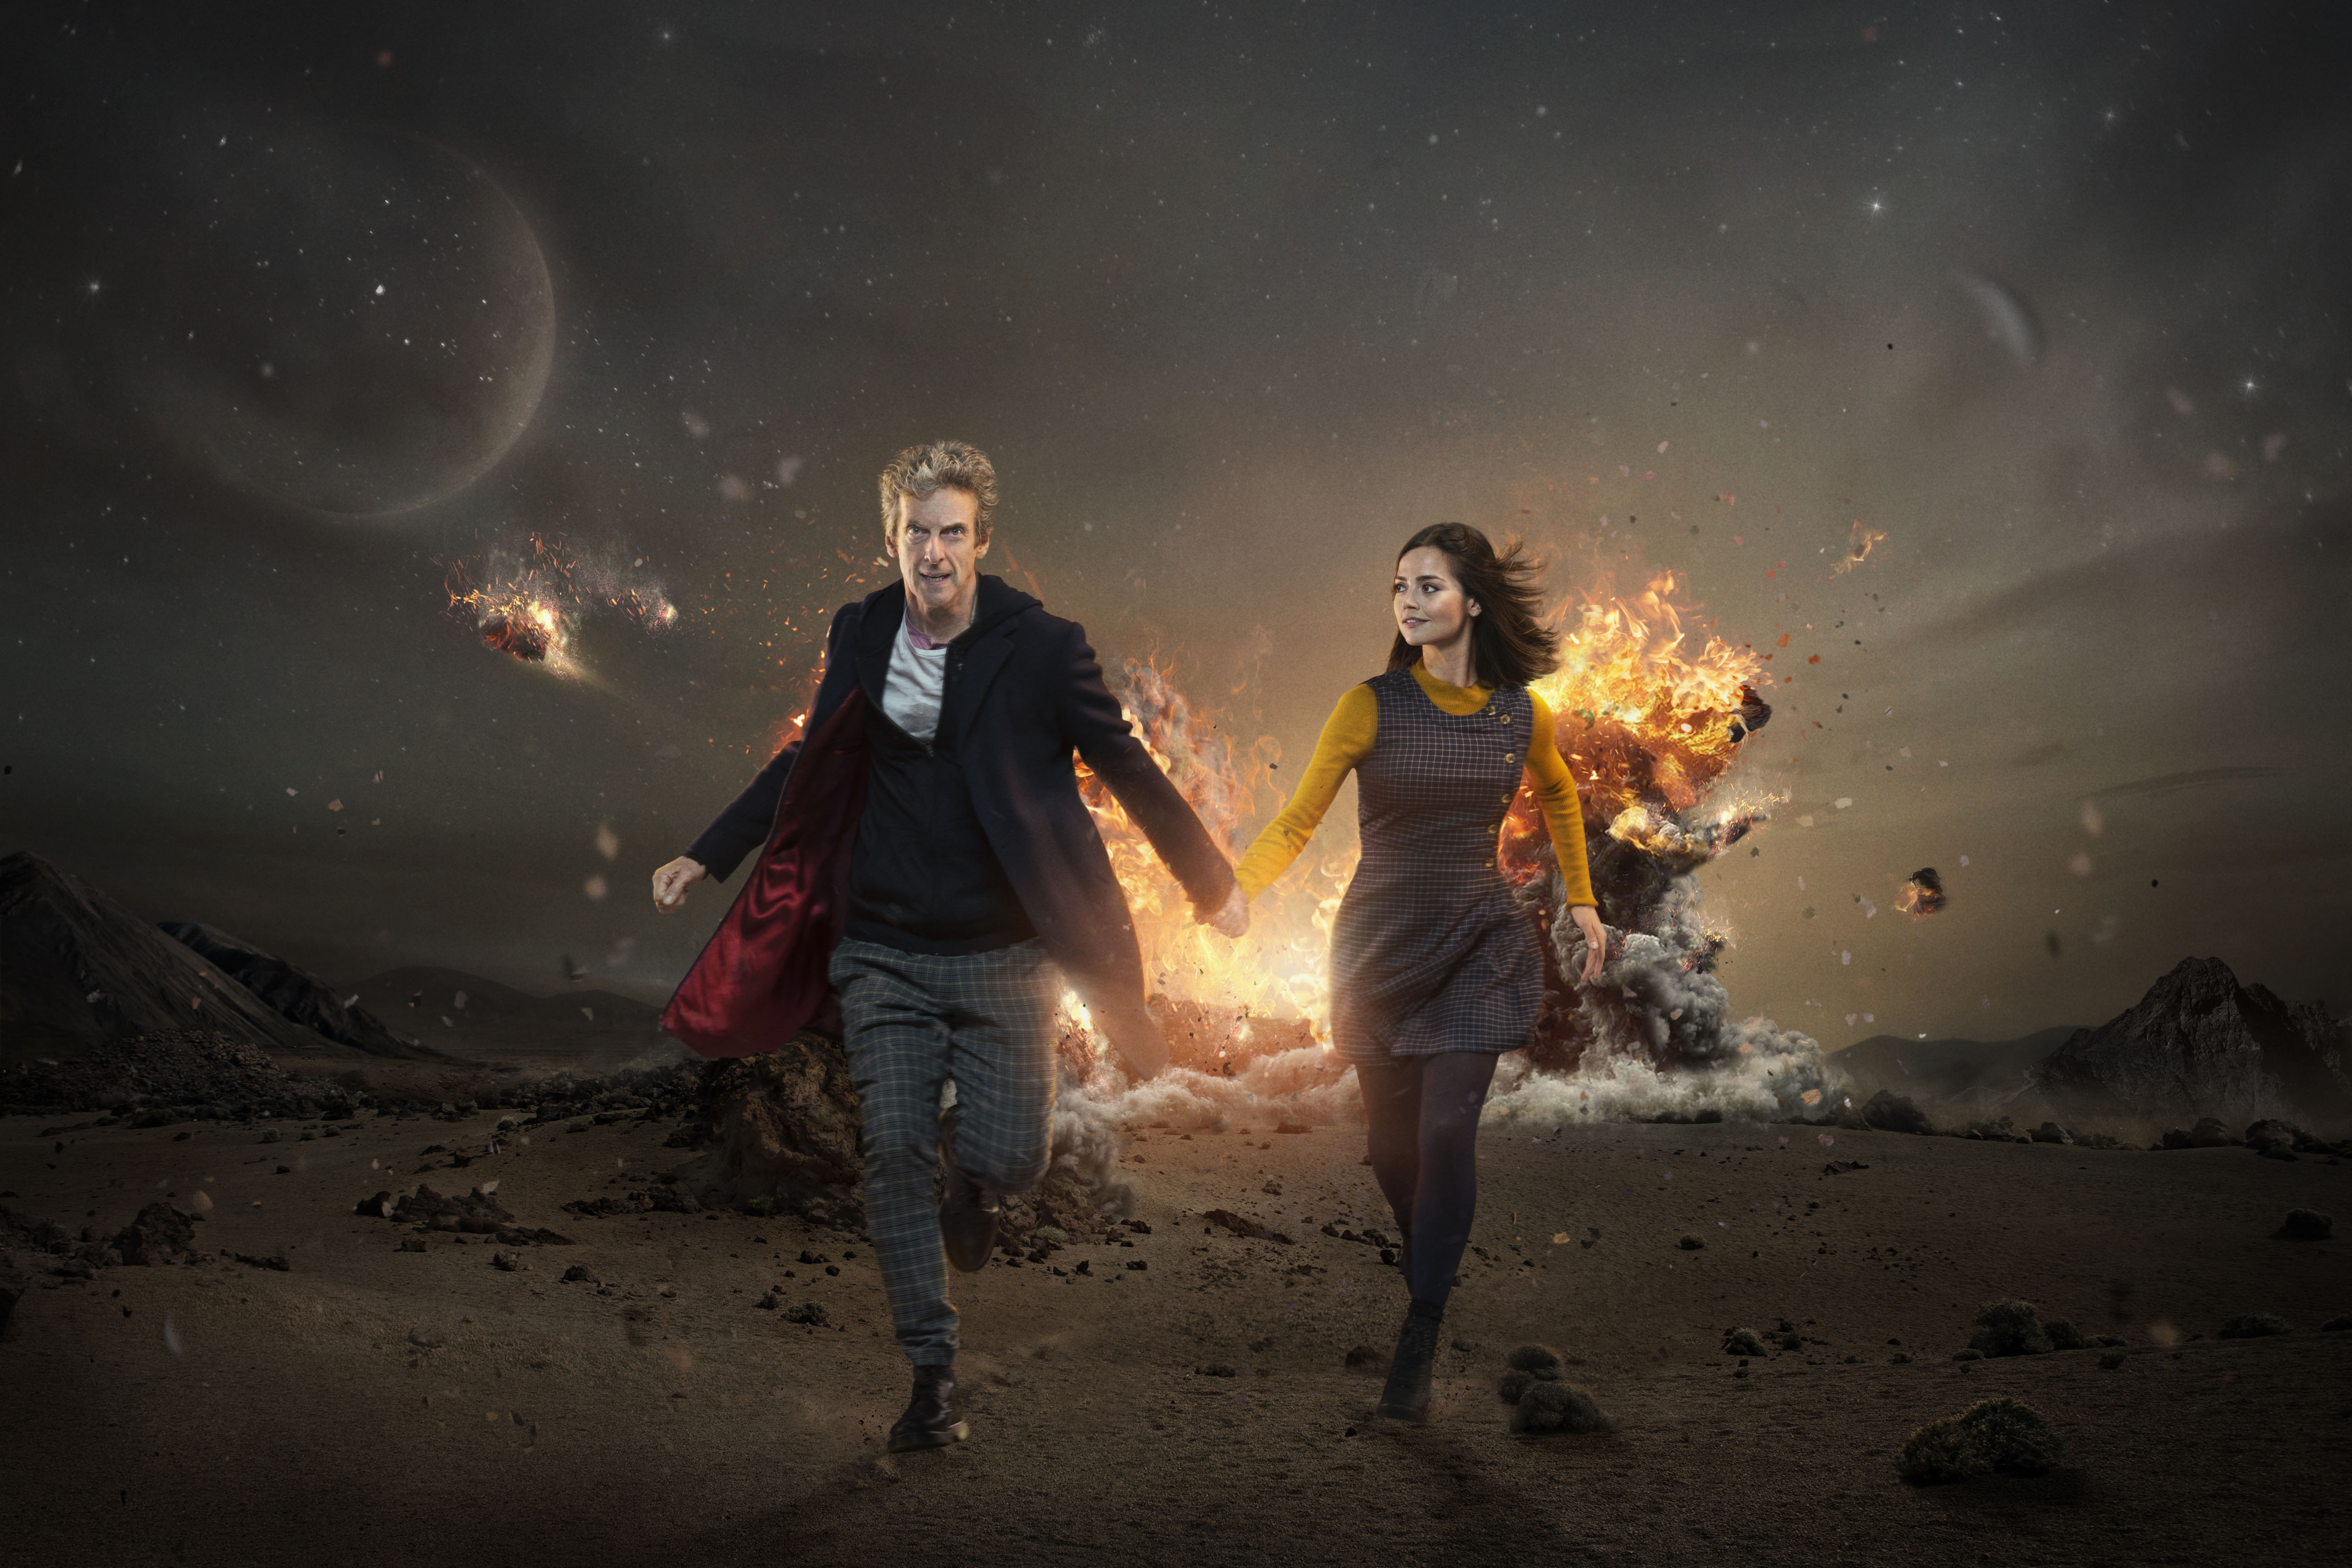 doctor who, tv show, clara oswald, jenna coleman, running, sci fi, the doctor for android